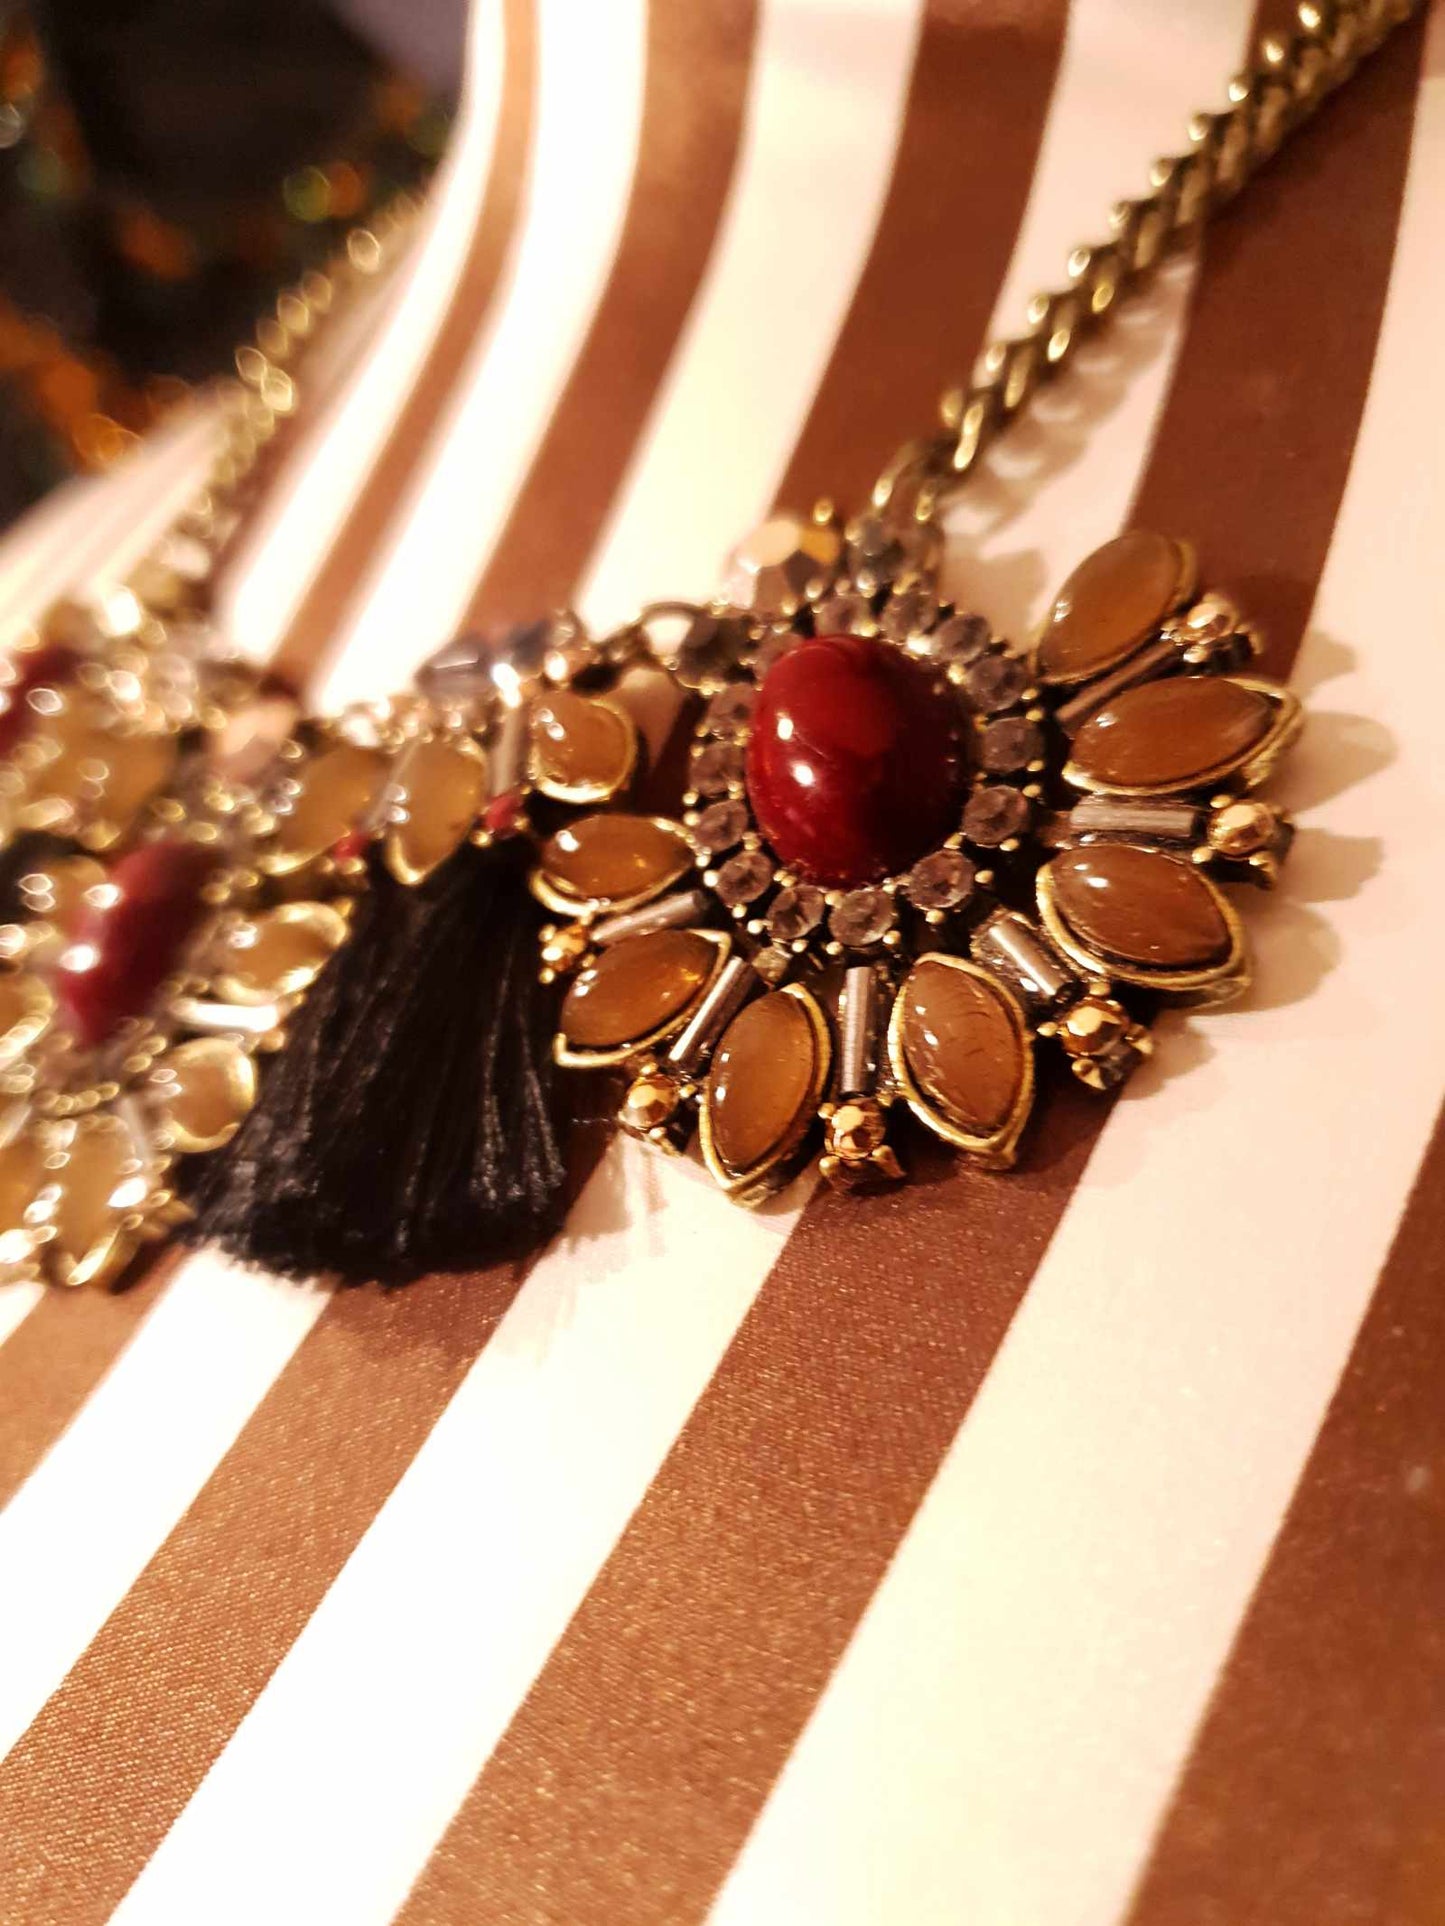 Pre-Loved Beautiful Ornate Diamante and Tassel Bohemian Necklace